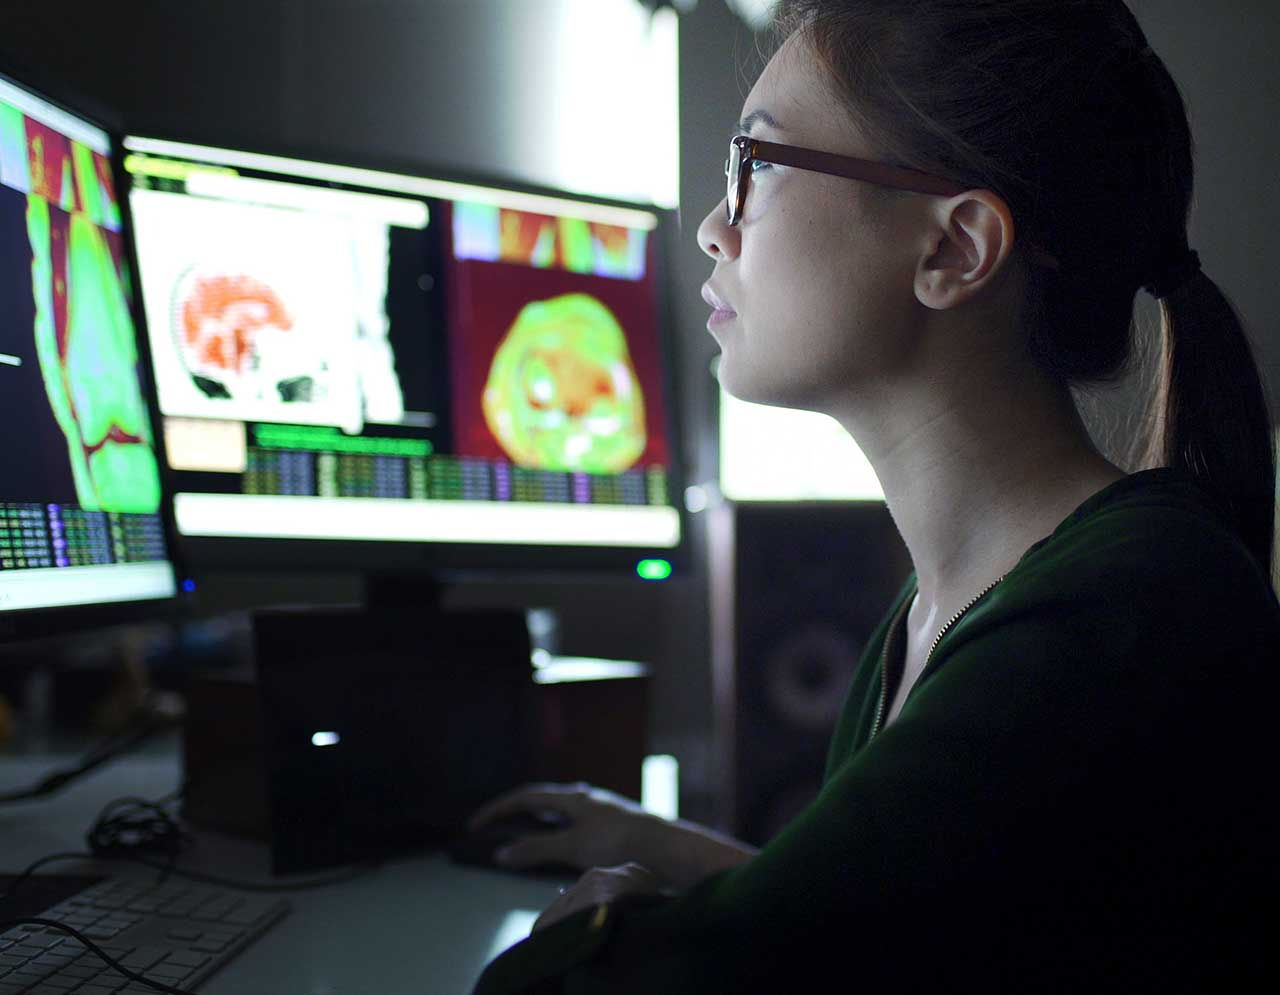 A woman in a darkened room analyzes medical scans on a bank of computer screens.